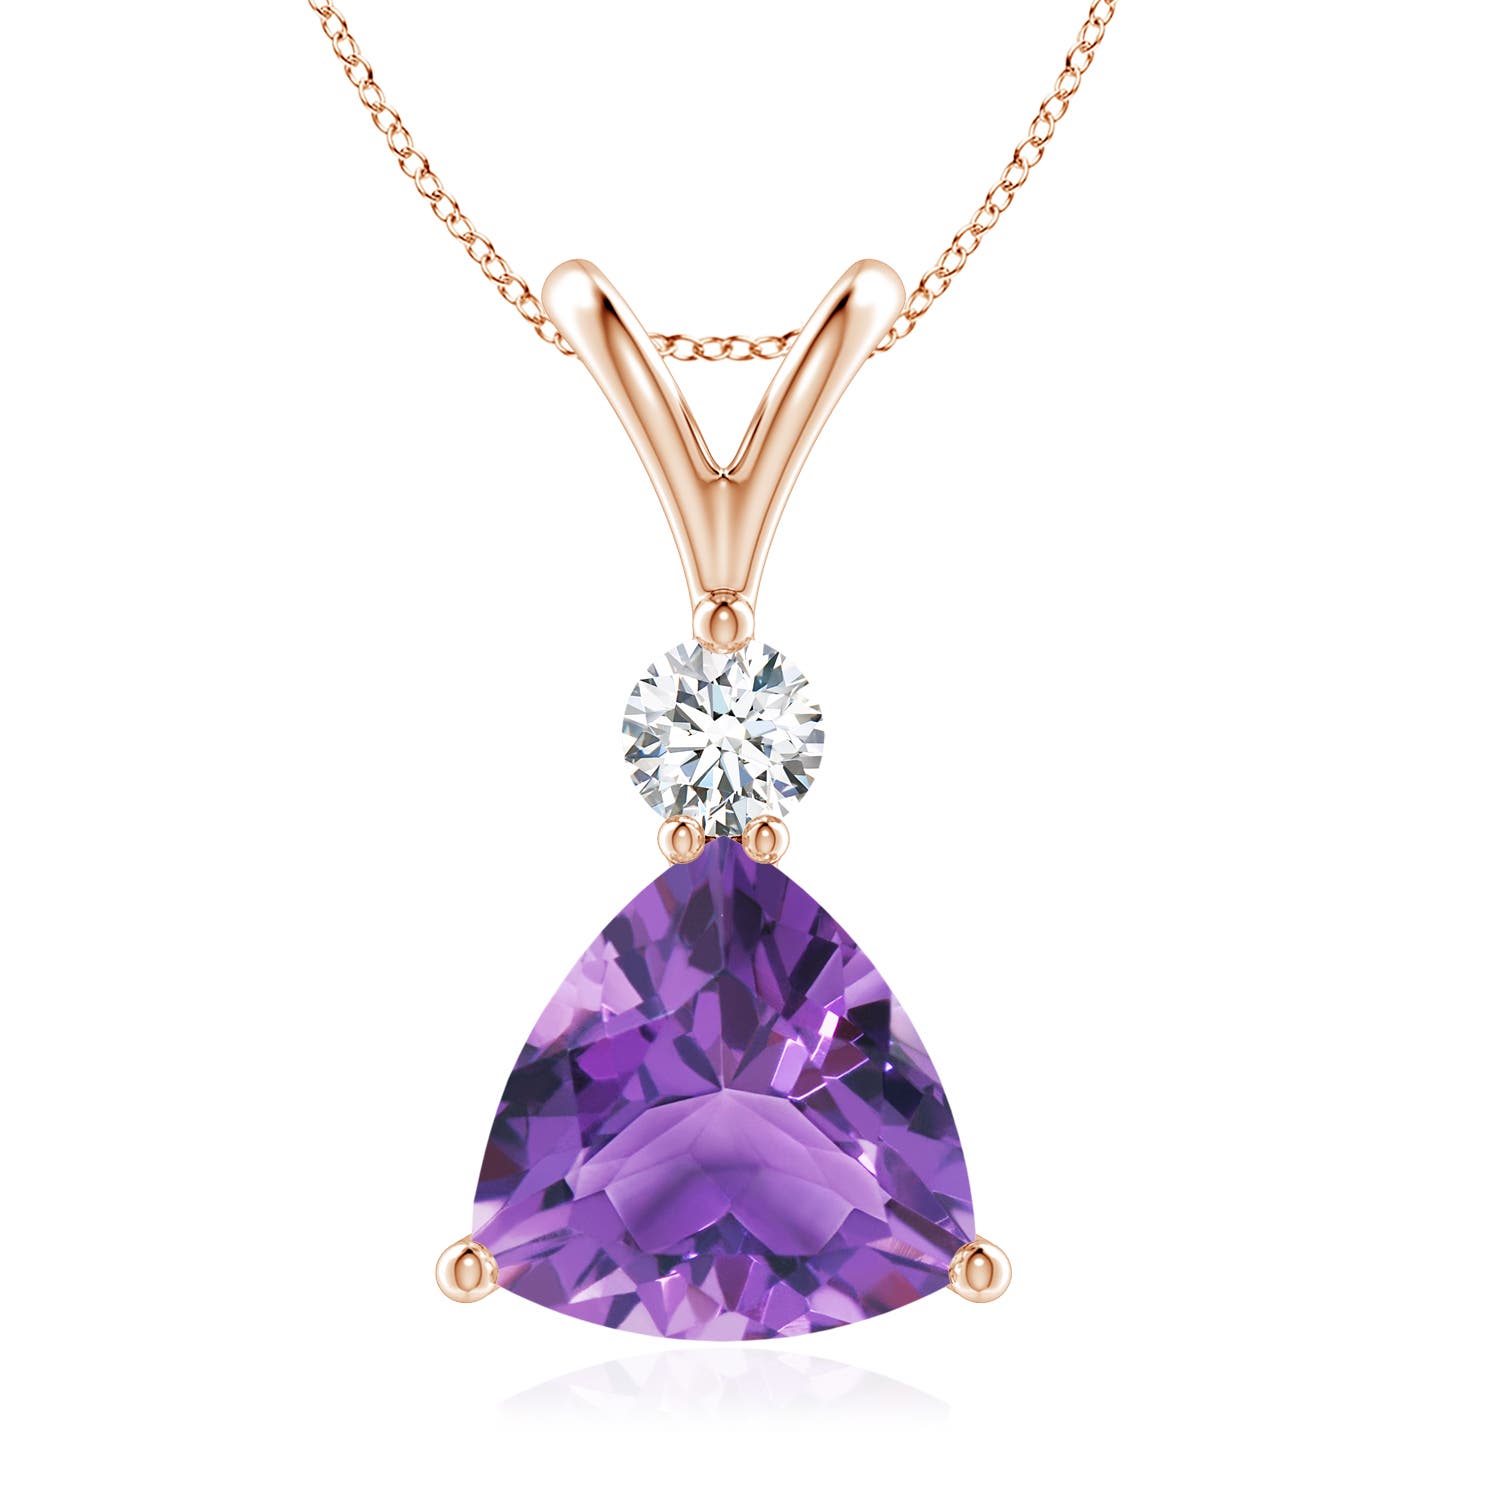 AA - Amethyst / 1.75 CT / 14 KT Rose Gold